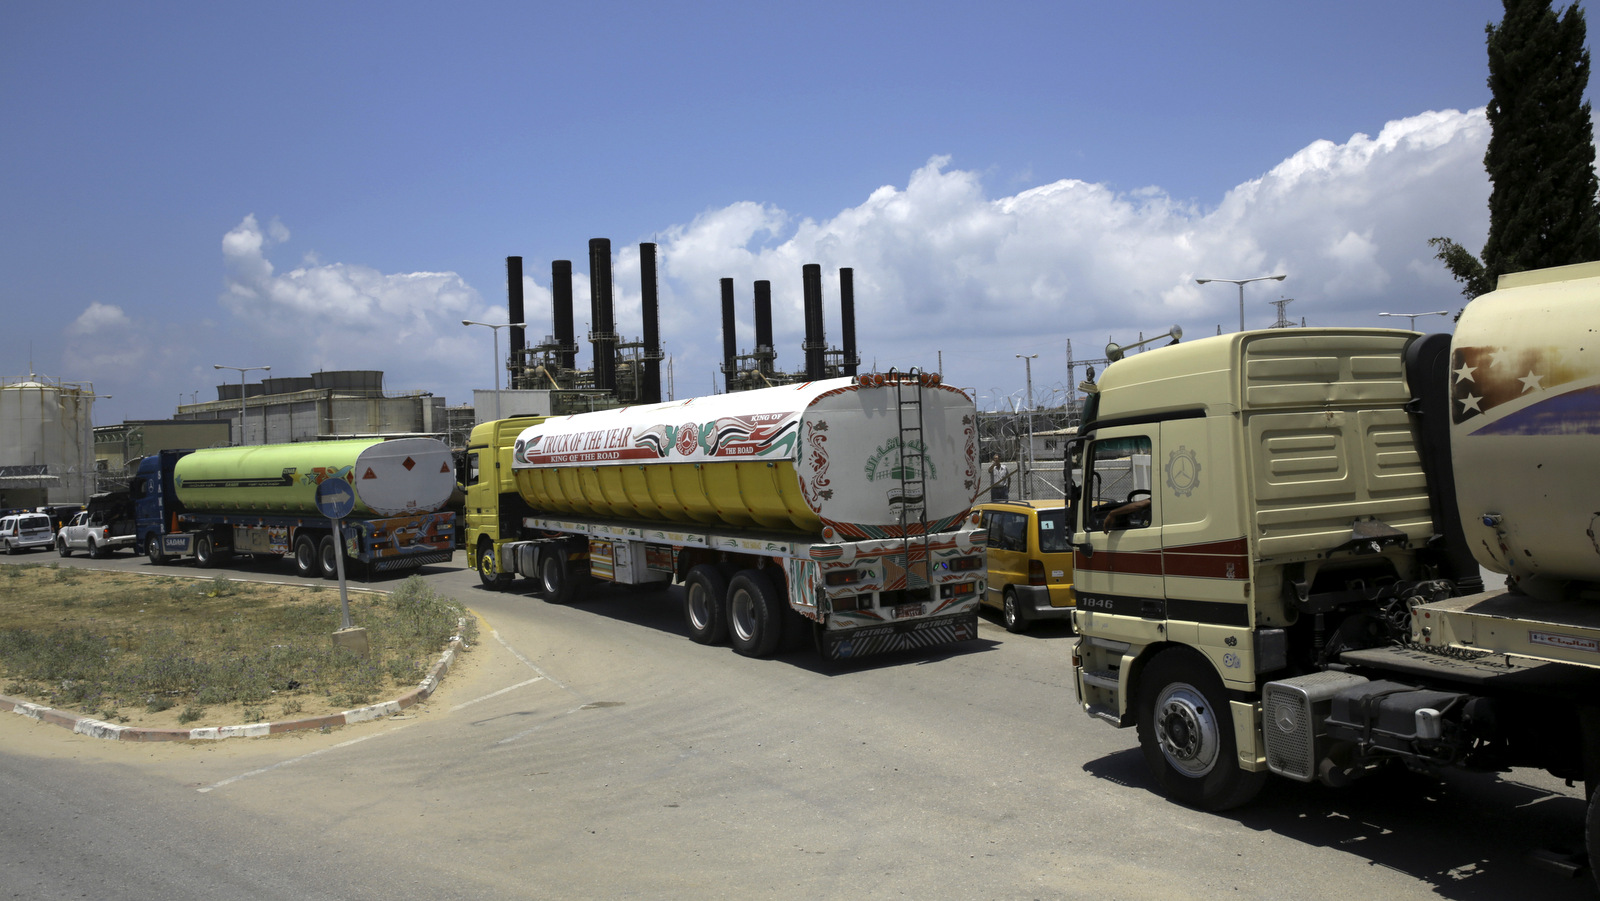 Egyptian trucks carrying fuel enter Gaza's power plant in Nusseirat, in the central Gaza Strip, Wednesday, June 21, 2017. Egypt trucked 1 million liters of cheap diesel fuel to the Gaza Strip's sole power plant — a rare shipment that temporarily eased a crippling electricity crisis enclave but also appeared to undercut Palestinian President Mahmoud Abbas. (AP/Adel Hana)